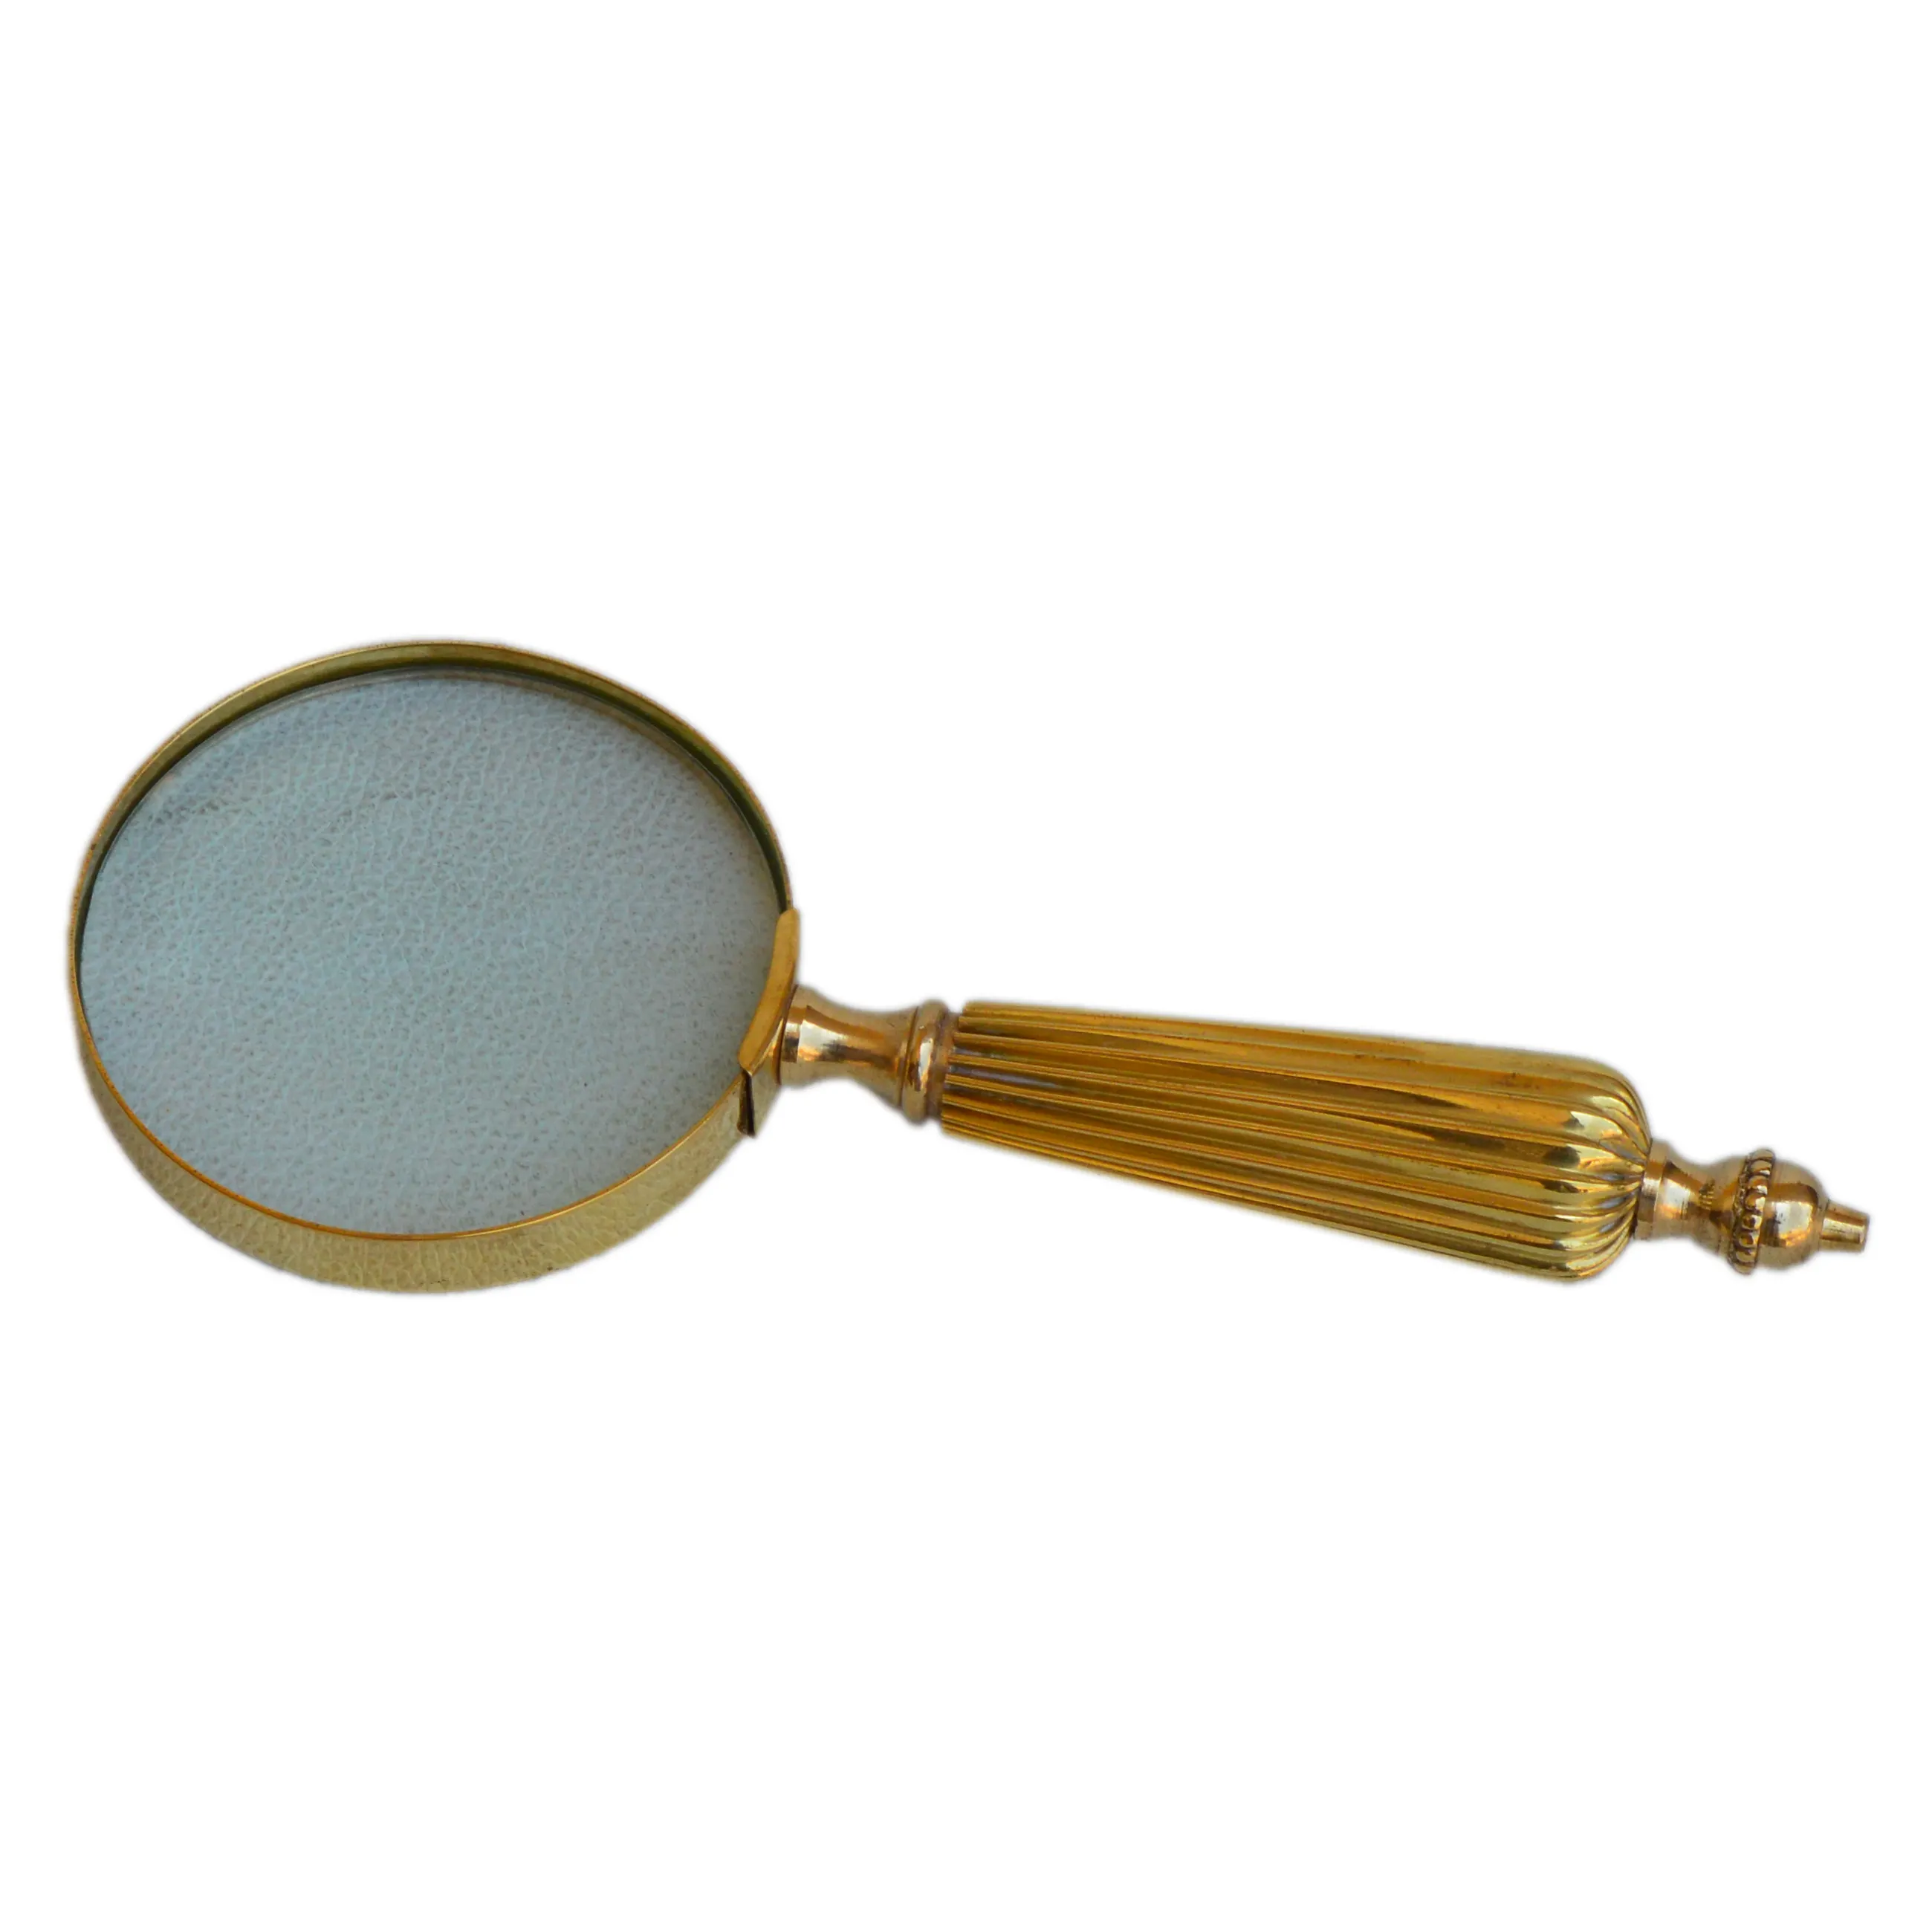 Gold Vintage Style Magnifying Glass Handle Magnifier For News Paper Books Reading Metal Brass Solid Quality Magnifier